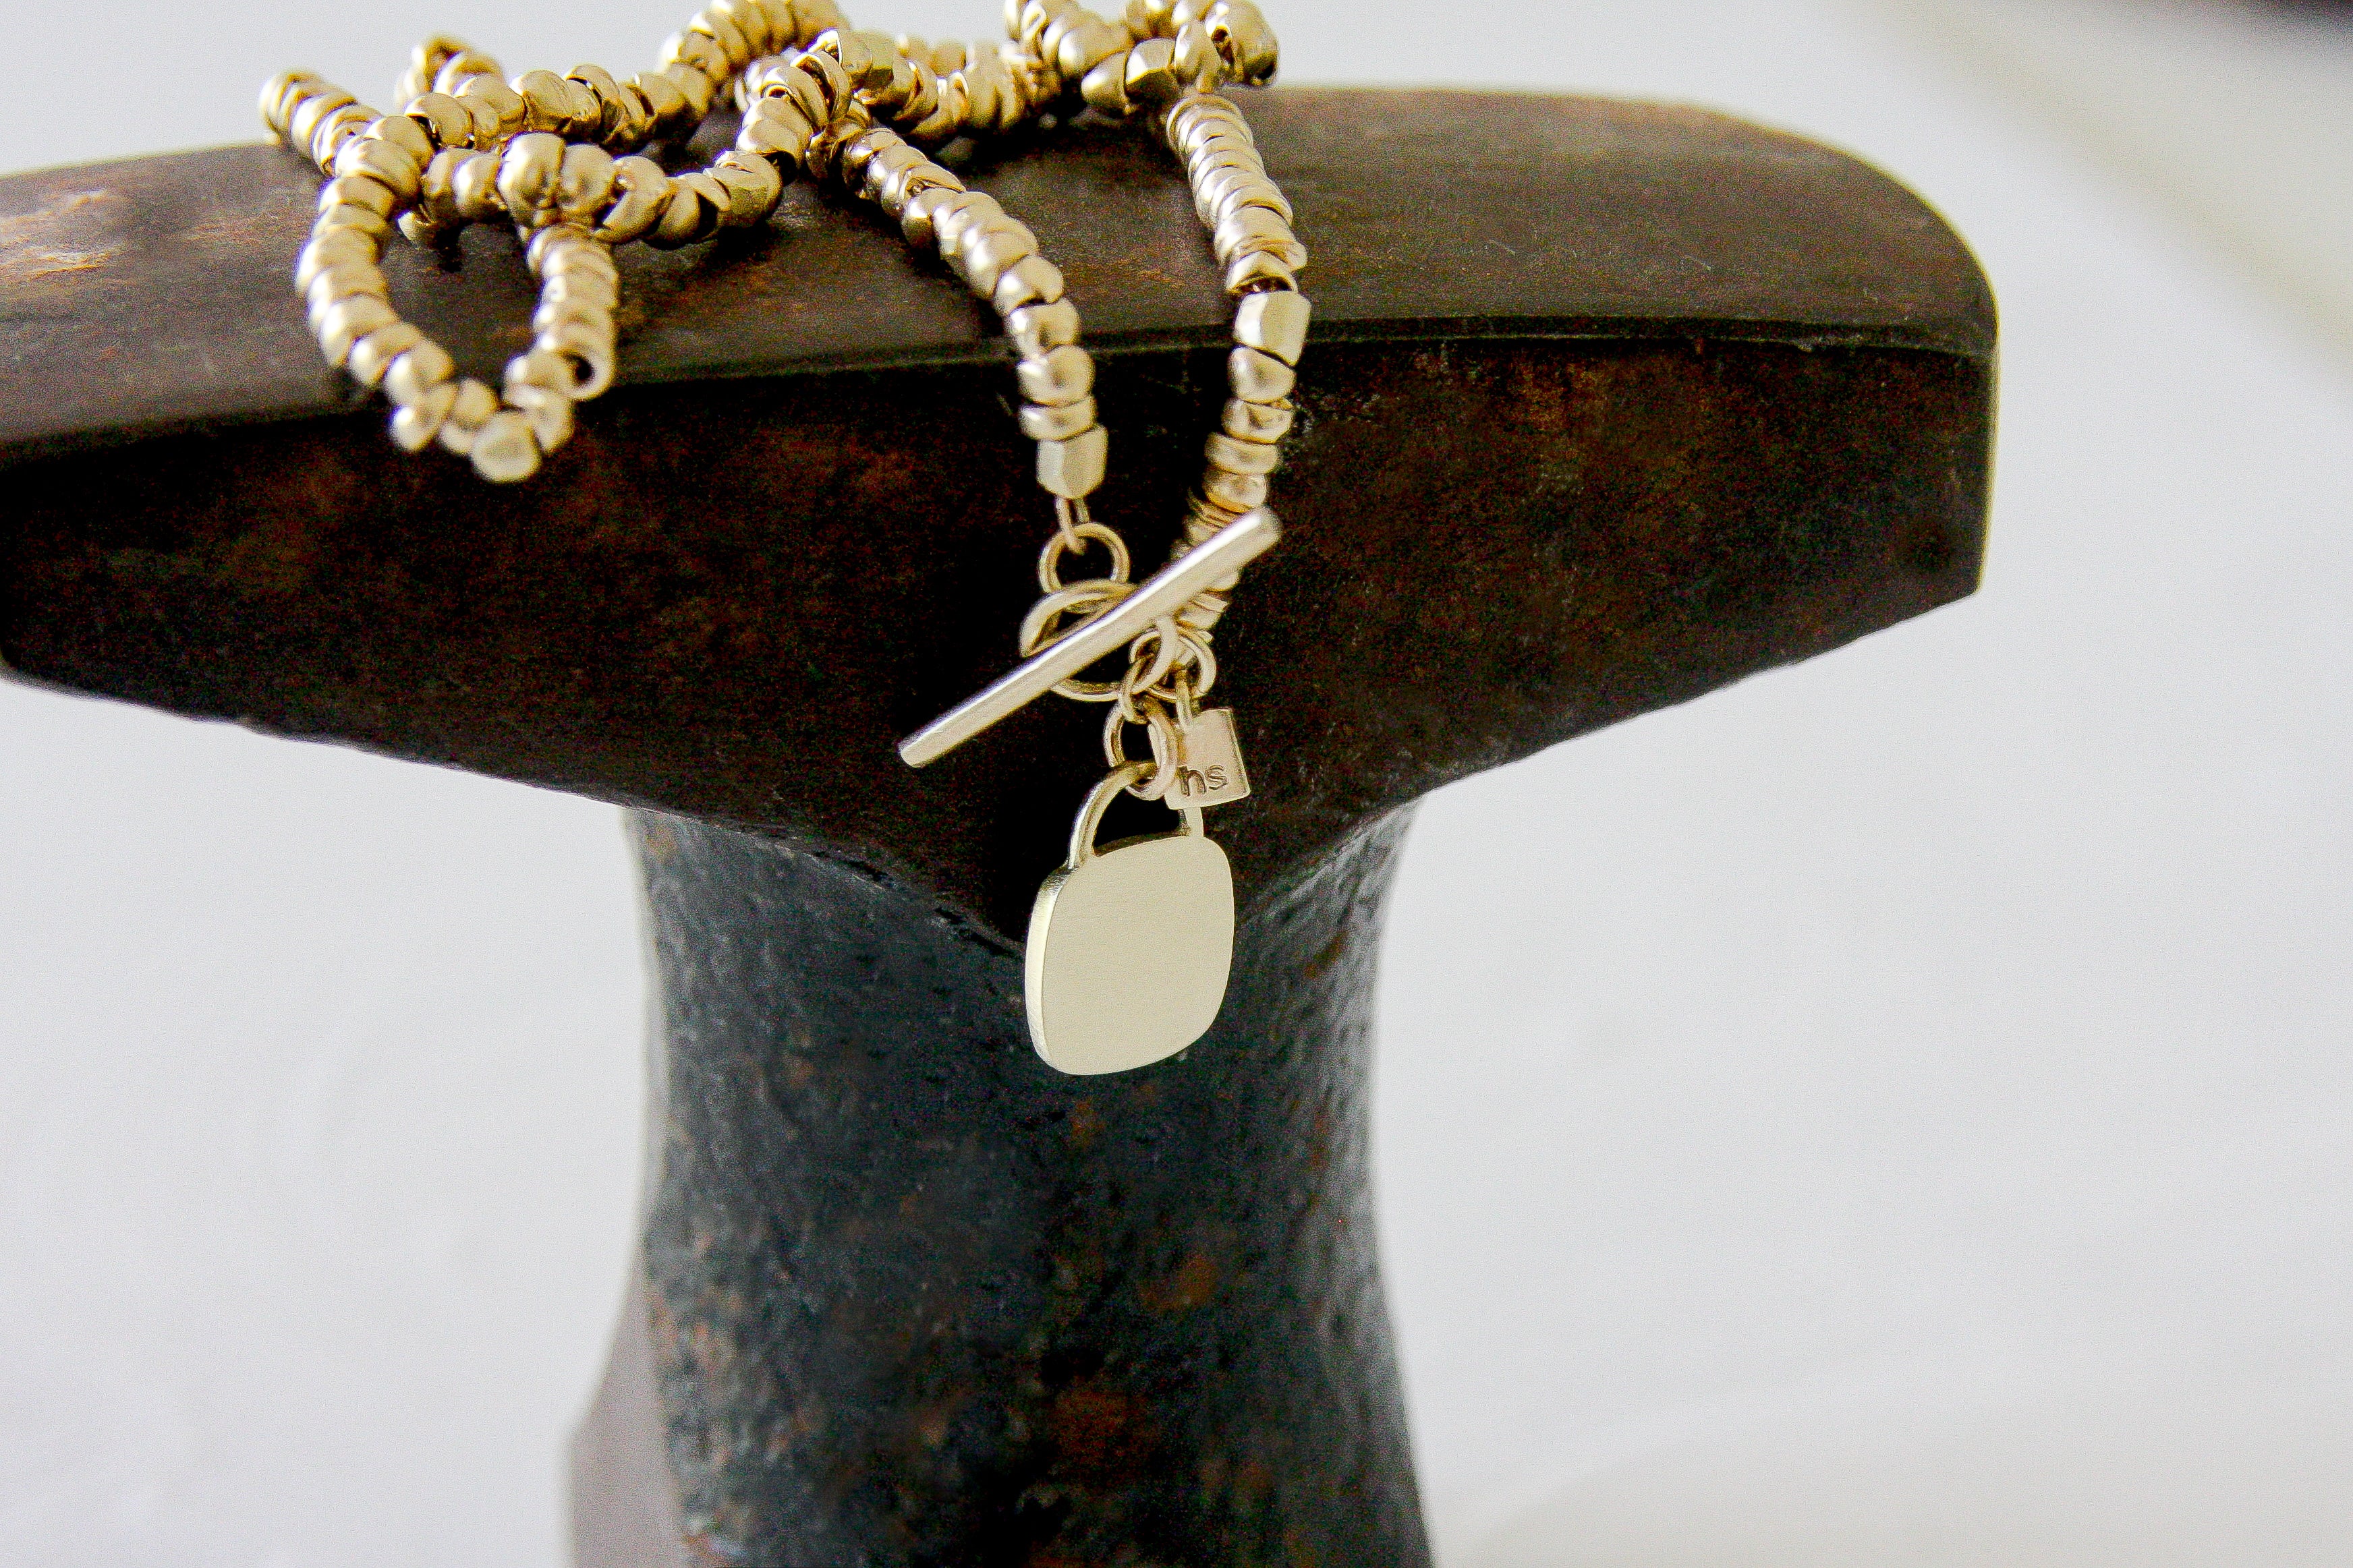 14K Solid Gold beads necklace with a gold & concrete charm